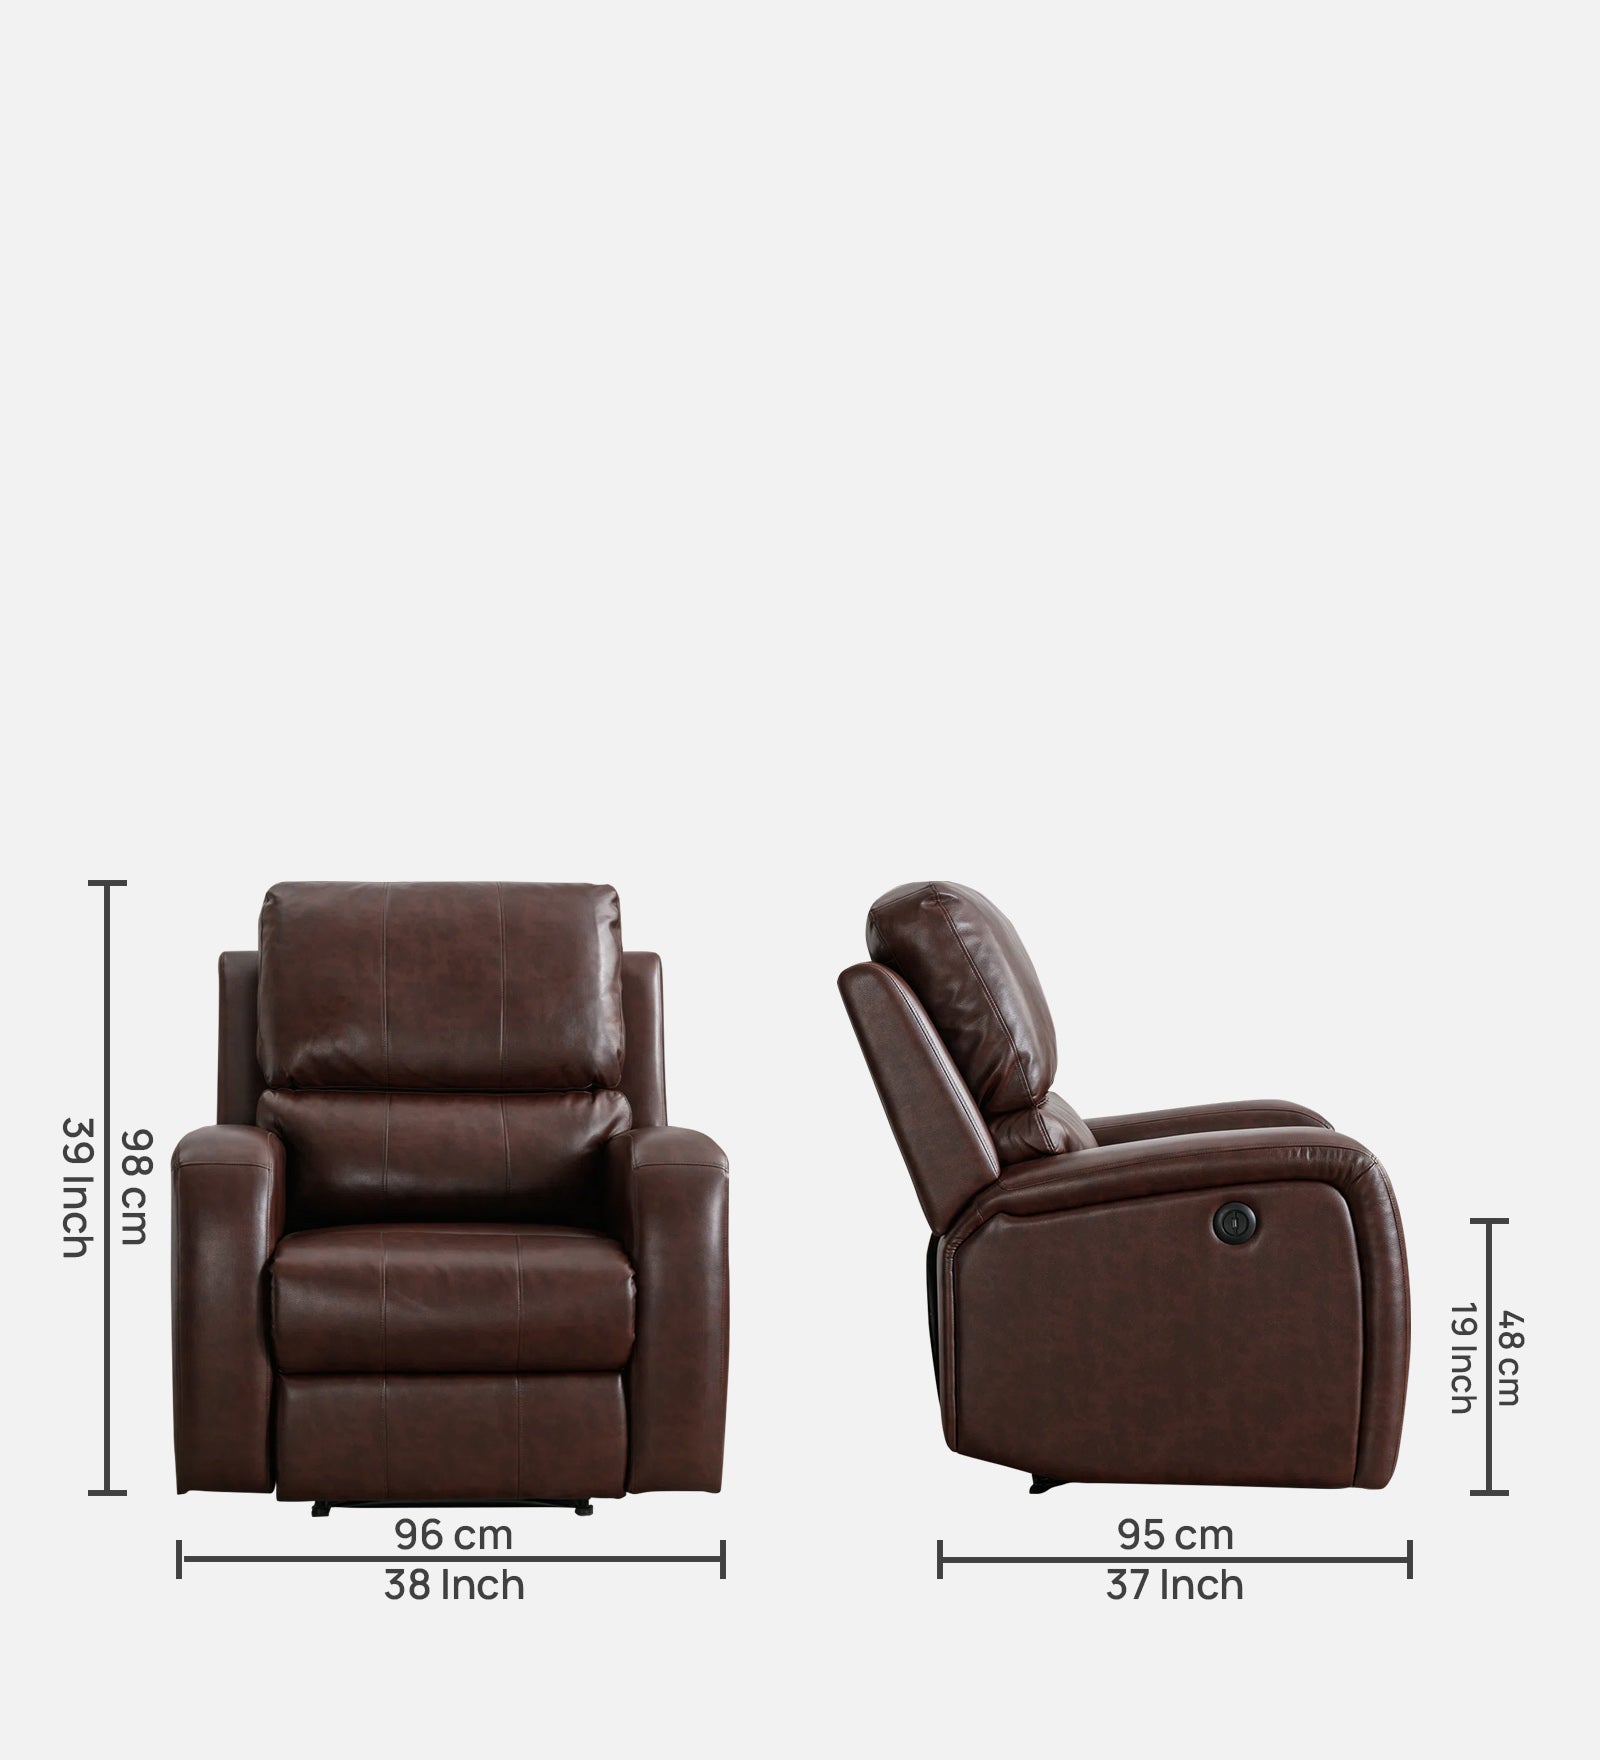 Mason Leather Motoorized 1 Seater Recliner In Dark Brown Faux Leather Finish